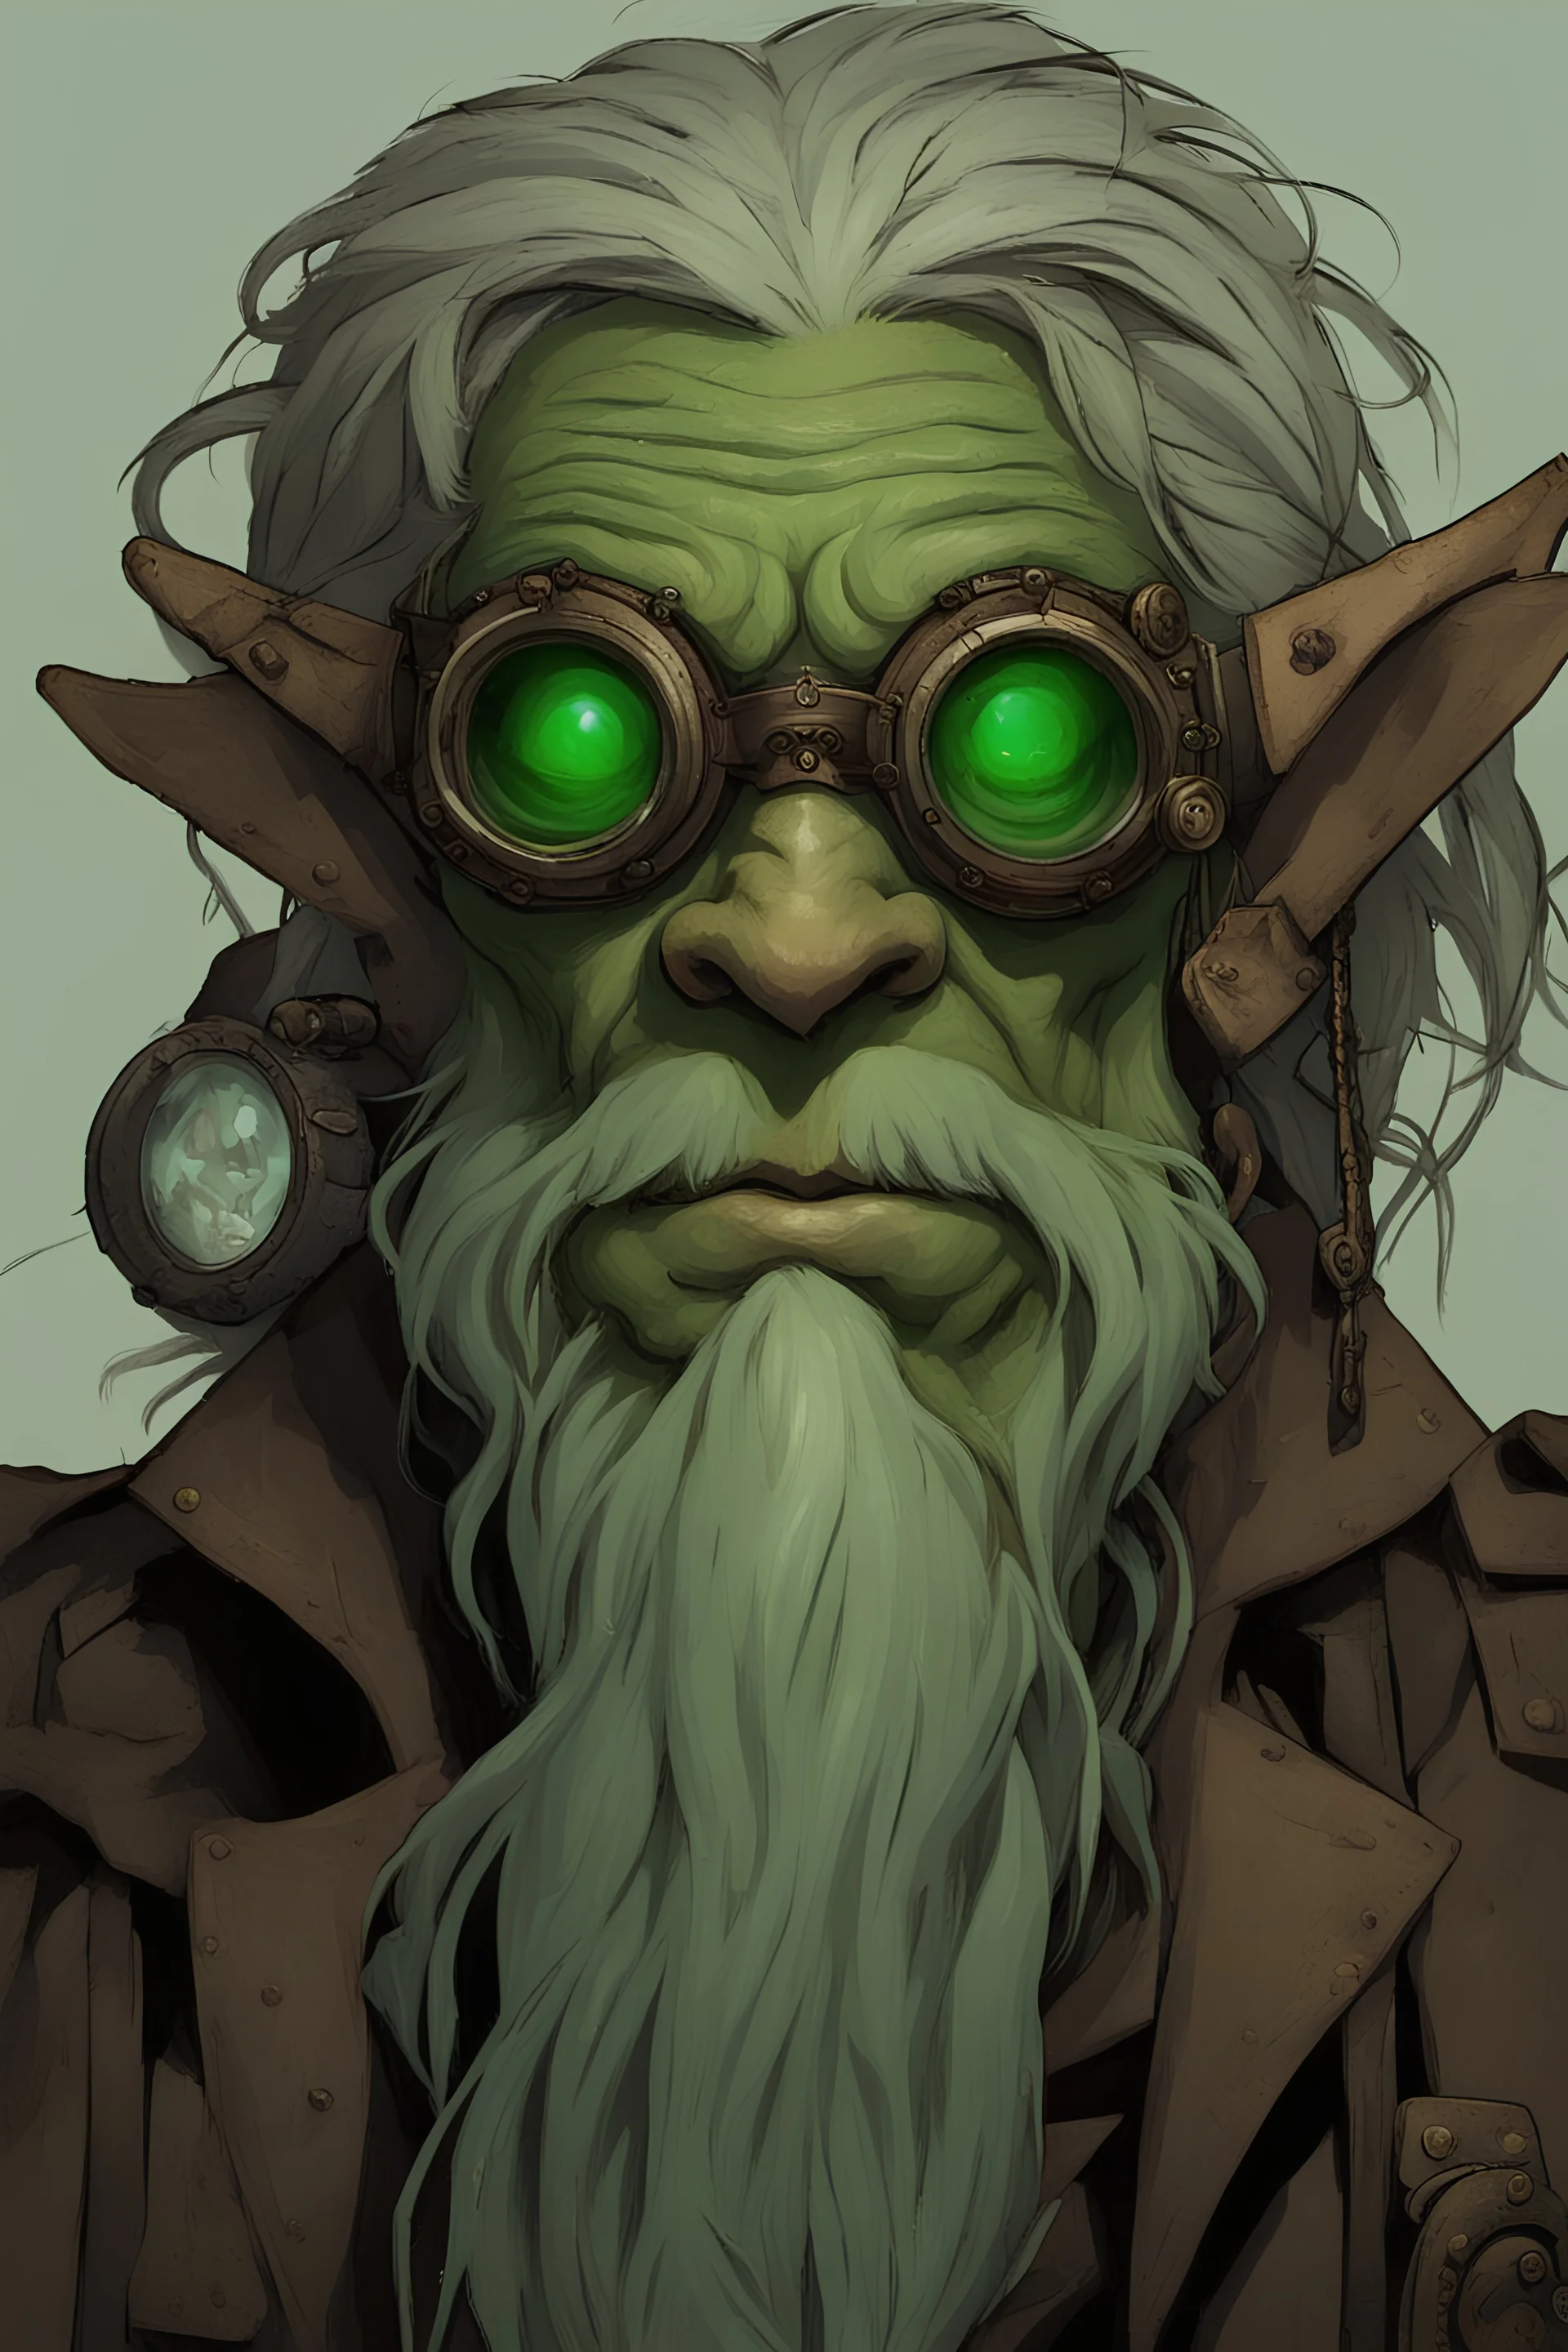 a d&d style old goblin man with long grey hair, light green skin, and bright green eyes wearing steampunk outfit and goggles on his forehead